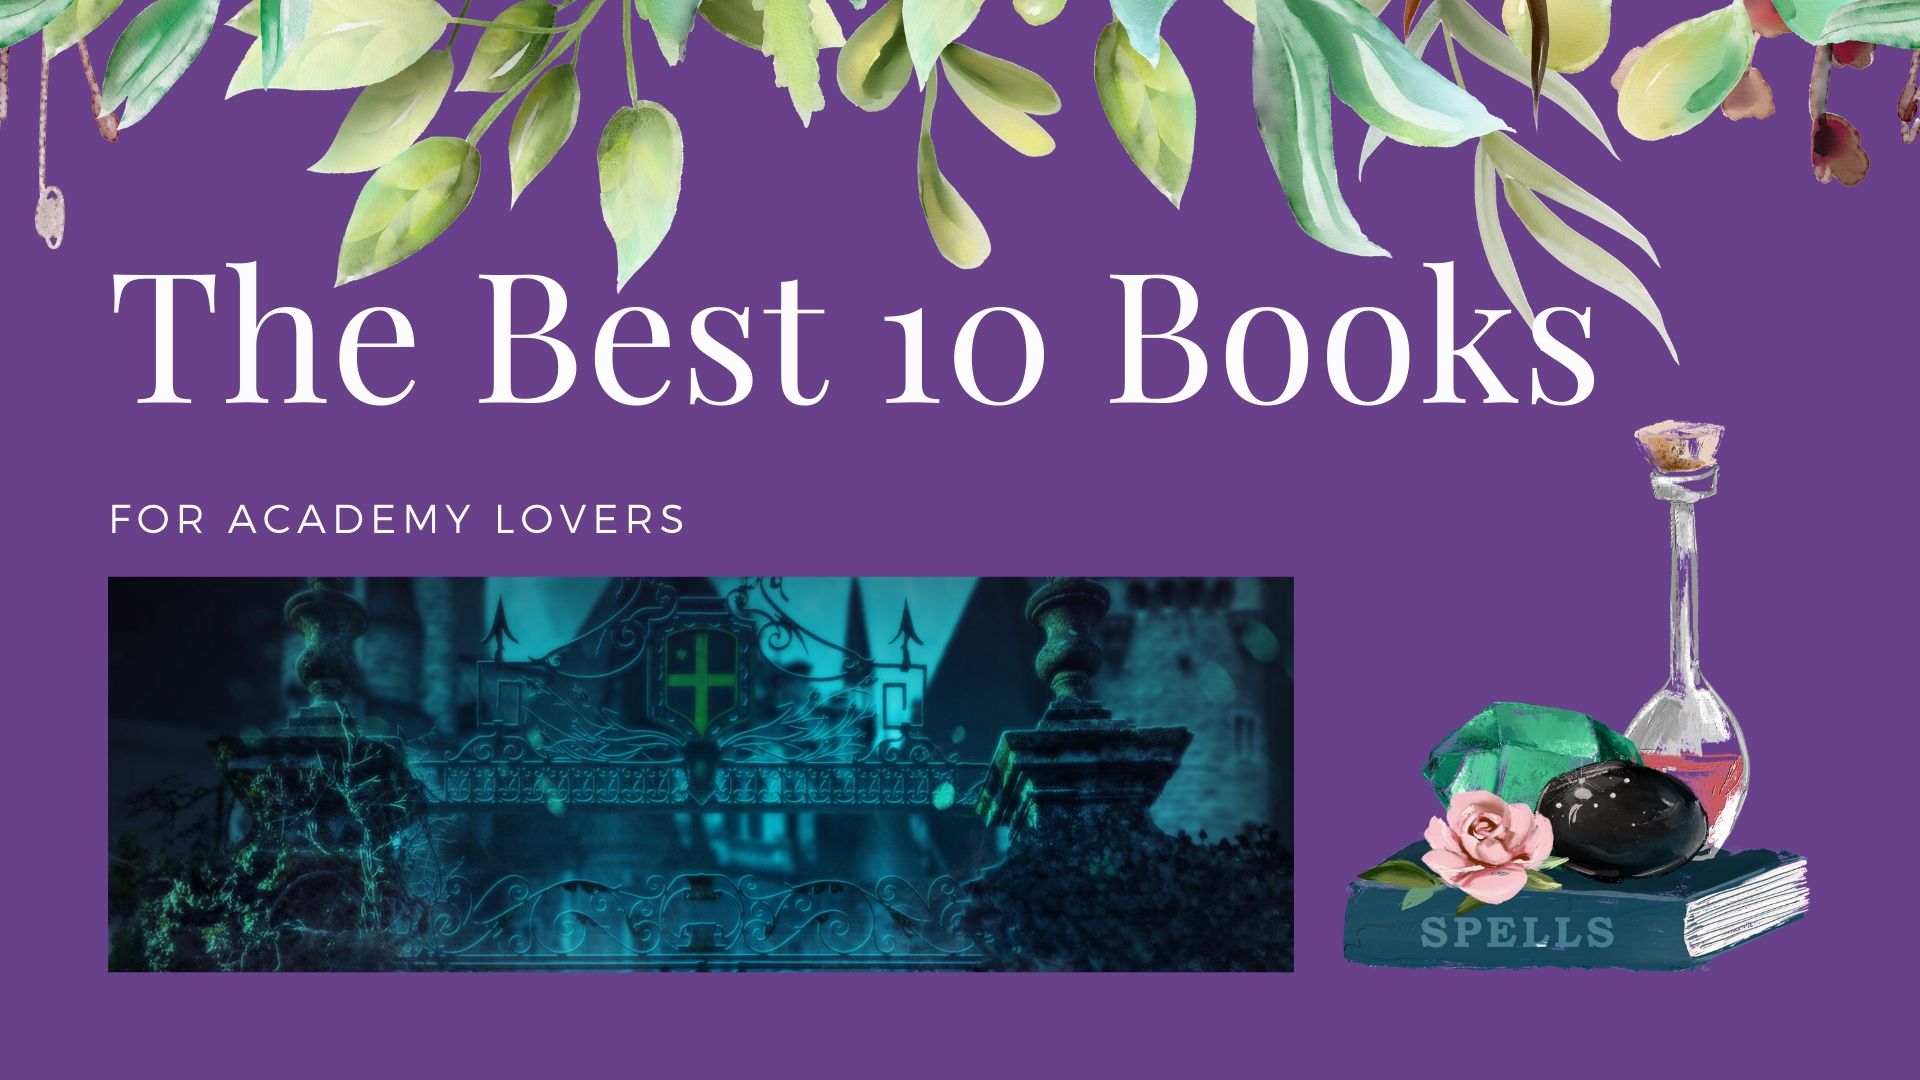 You are currently viewing The Best 10 Books for Academy Lovers